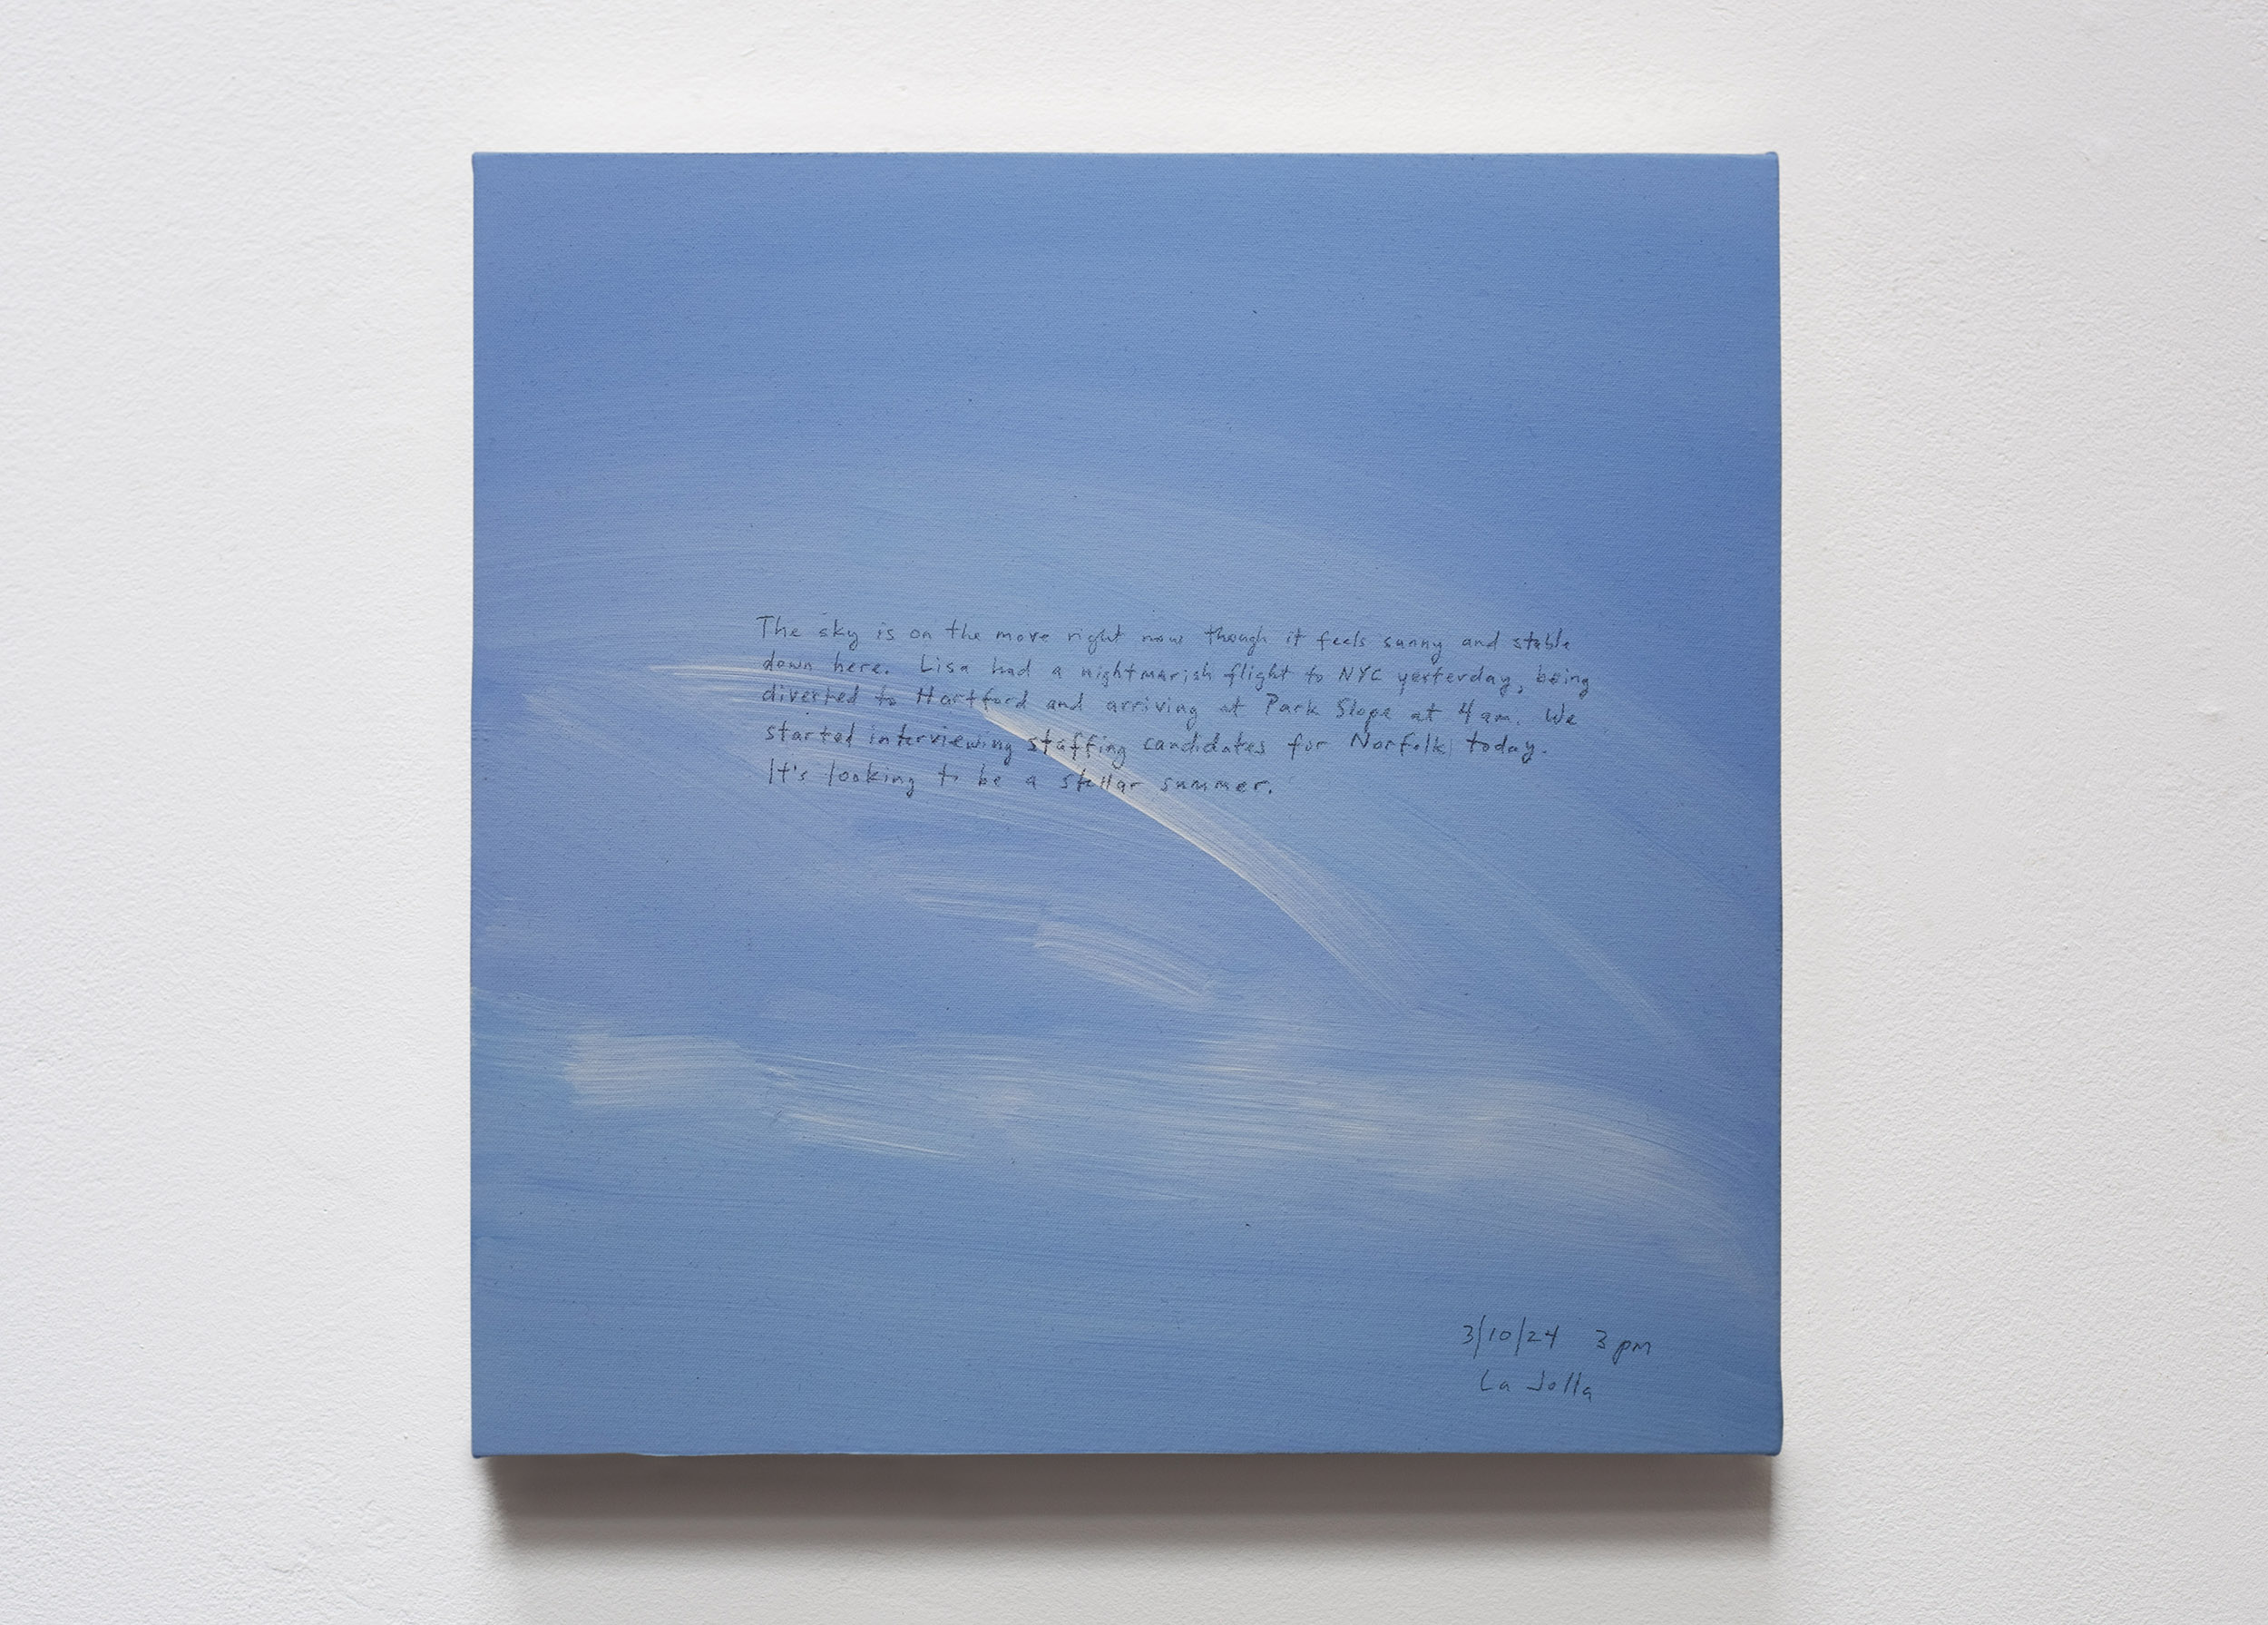 A 14 × 14 inch, acrylic painting of the sky. A journal entry is handwritten on the painting:

“The sky is on the move right now though it feels sunny and stable down here. Lisa had a nightmarish flight to NYC yesterday, being diverted to Hartford and arriving in Park Slope at 4 am. We started interviewing staffing candidates for Norfolk today. It’s looking to be a stellar summer.

3/10/24 3 pm
La Jolla”